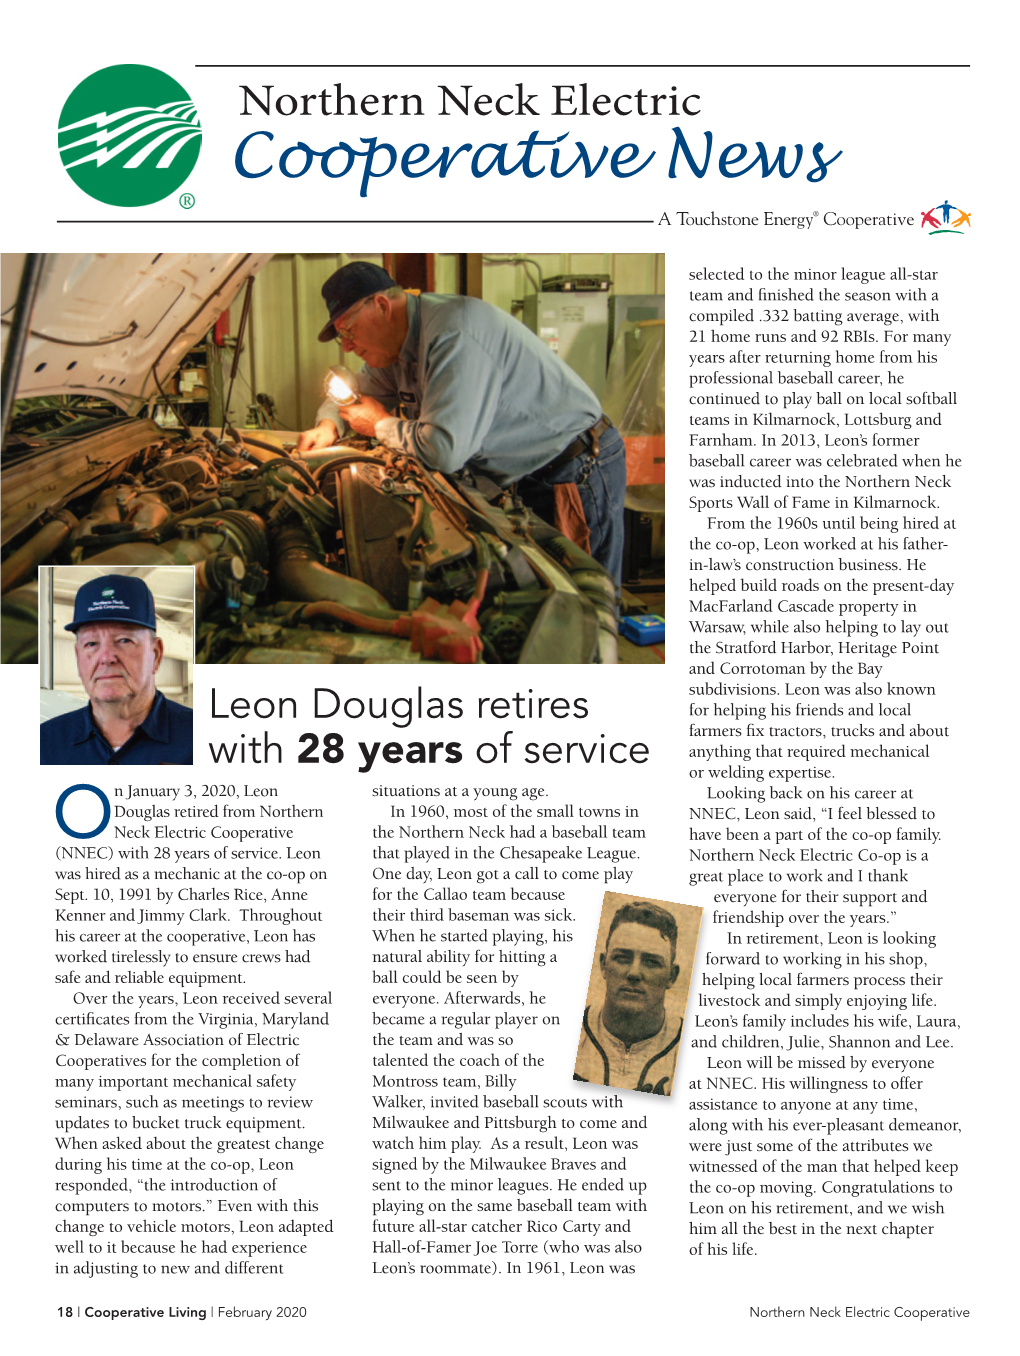 To View the NNEC Pages in the February 2020 Cooperative Living Magazine